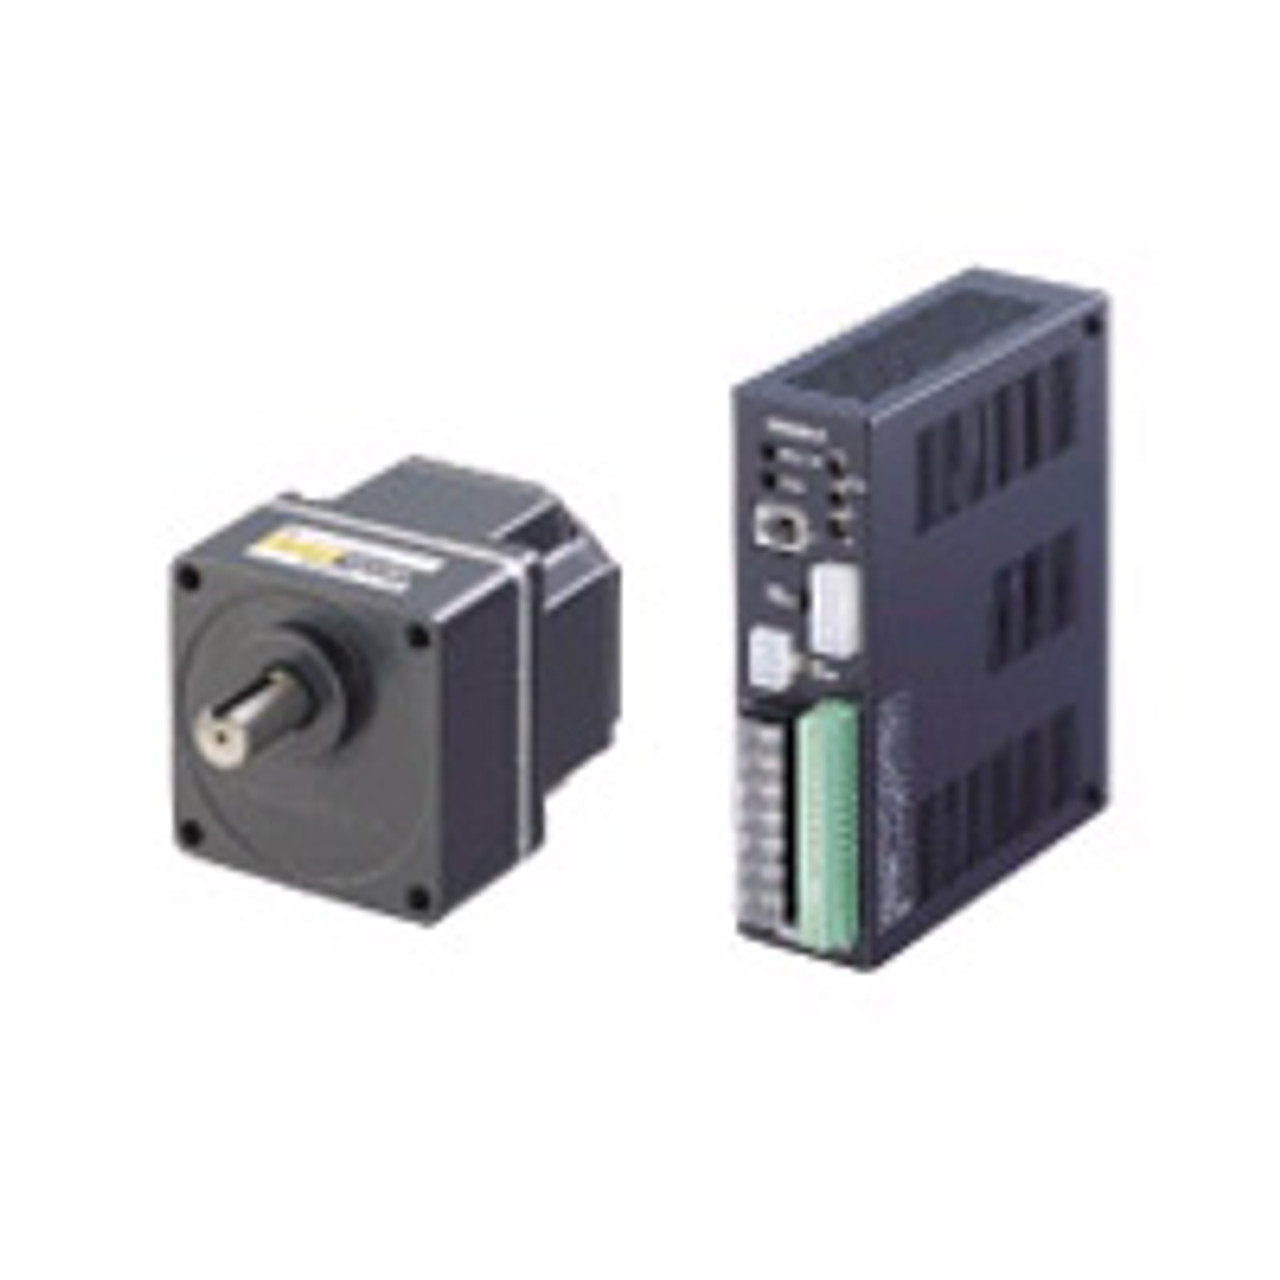 BX460A-50S - Product Image